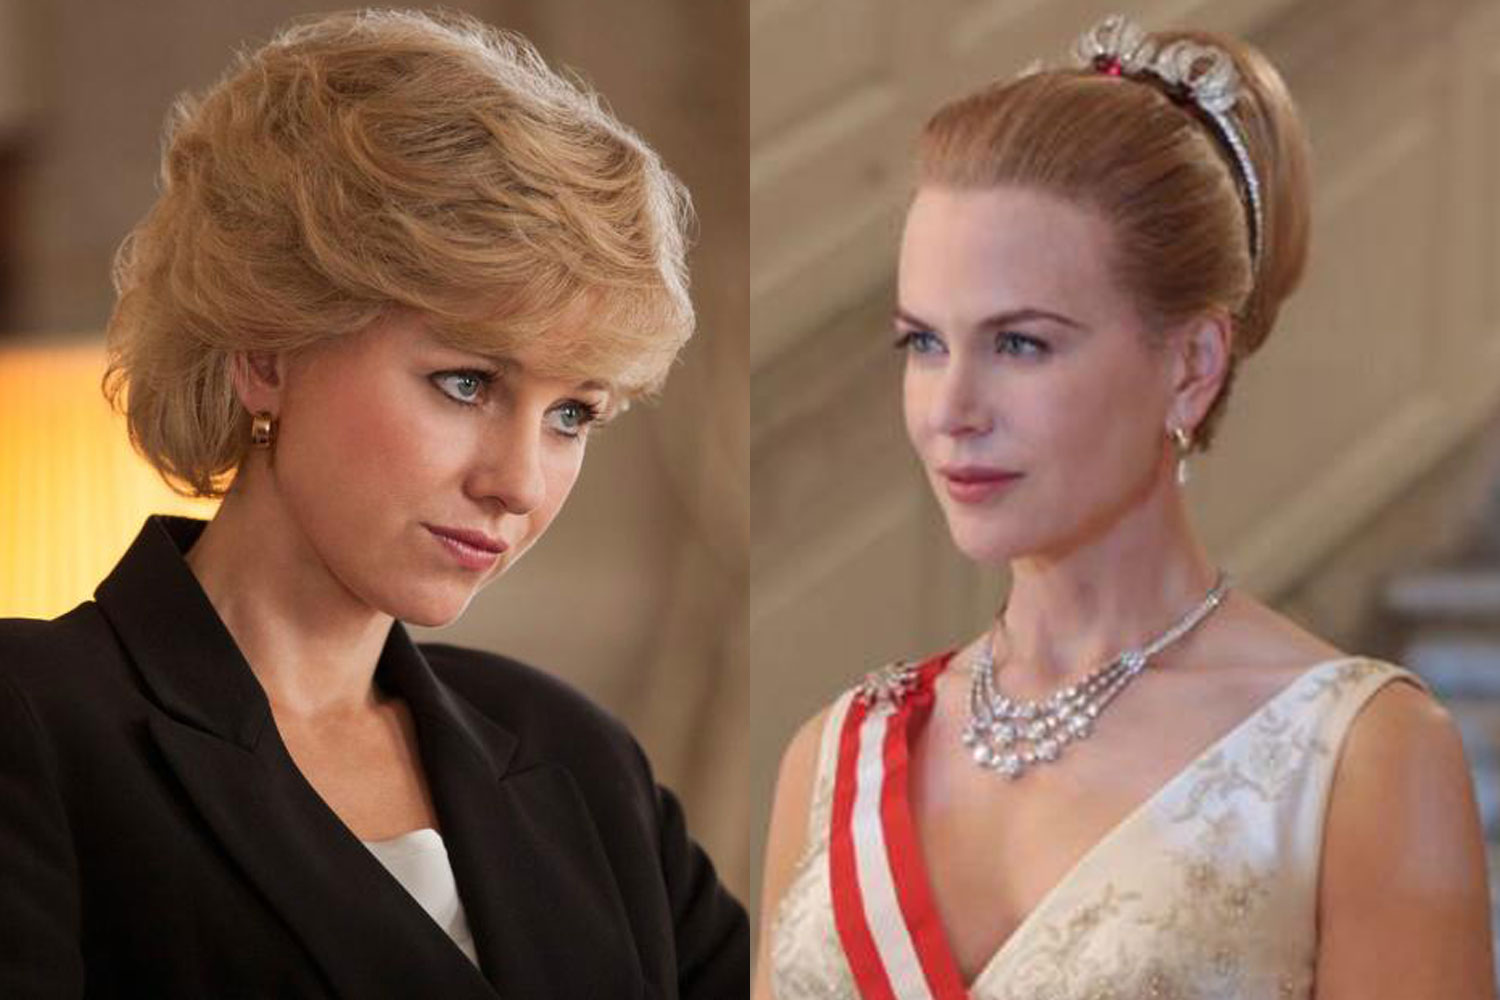 From left: Naomi Watts as Princess Diana in <i>Diana</i>, and Nicole Kidman as Princess Grace in <i>Grace of Monaco</i>. (Laurie Sparham—Entertainment One; David Koskas—Weinstein Company)